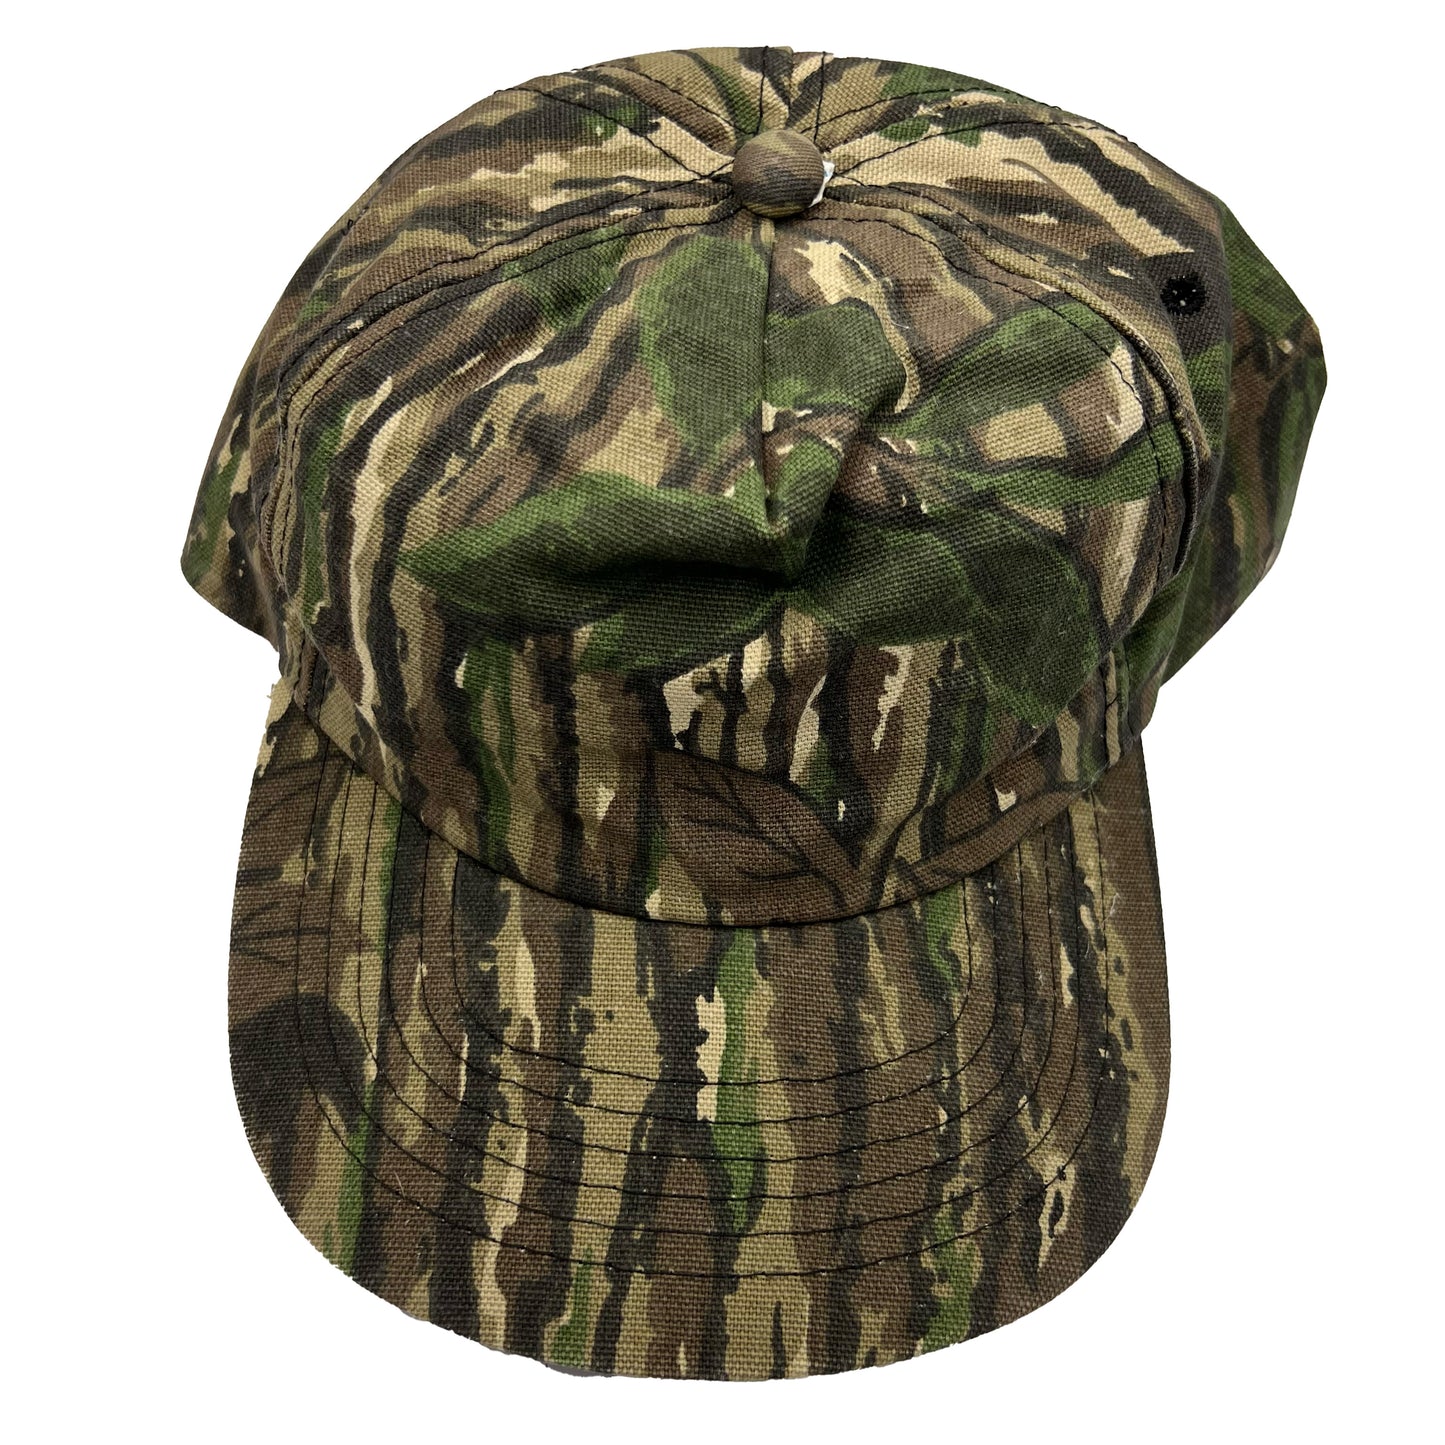 Vintage Handpicked Camo Trucker Hat- 1 FOR $20/2 FOR $30